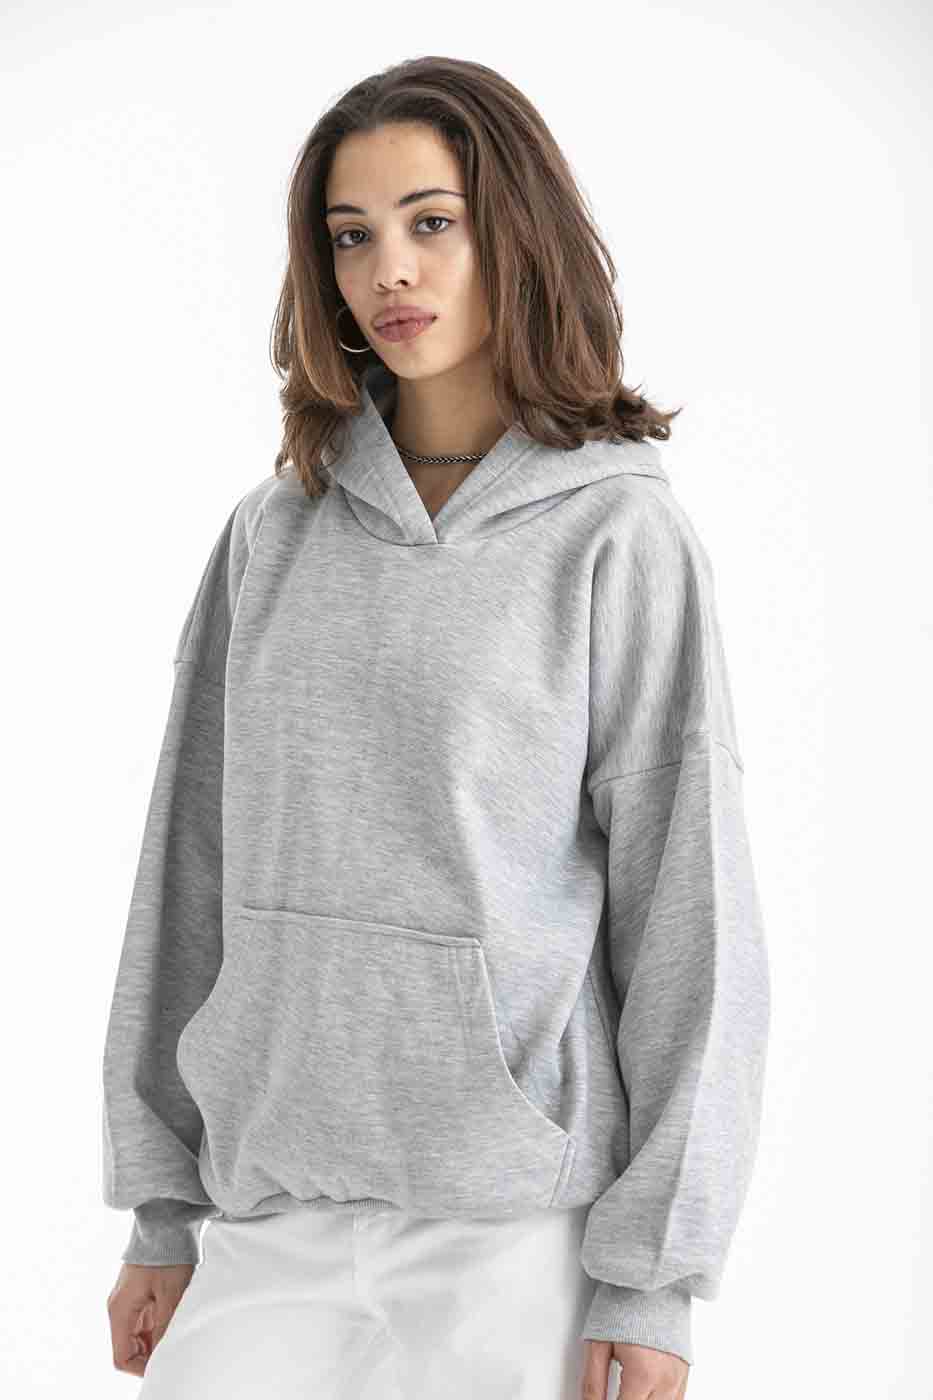 Oversized Grey hoodie From Dresscode in Egypt